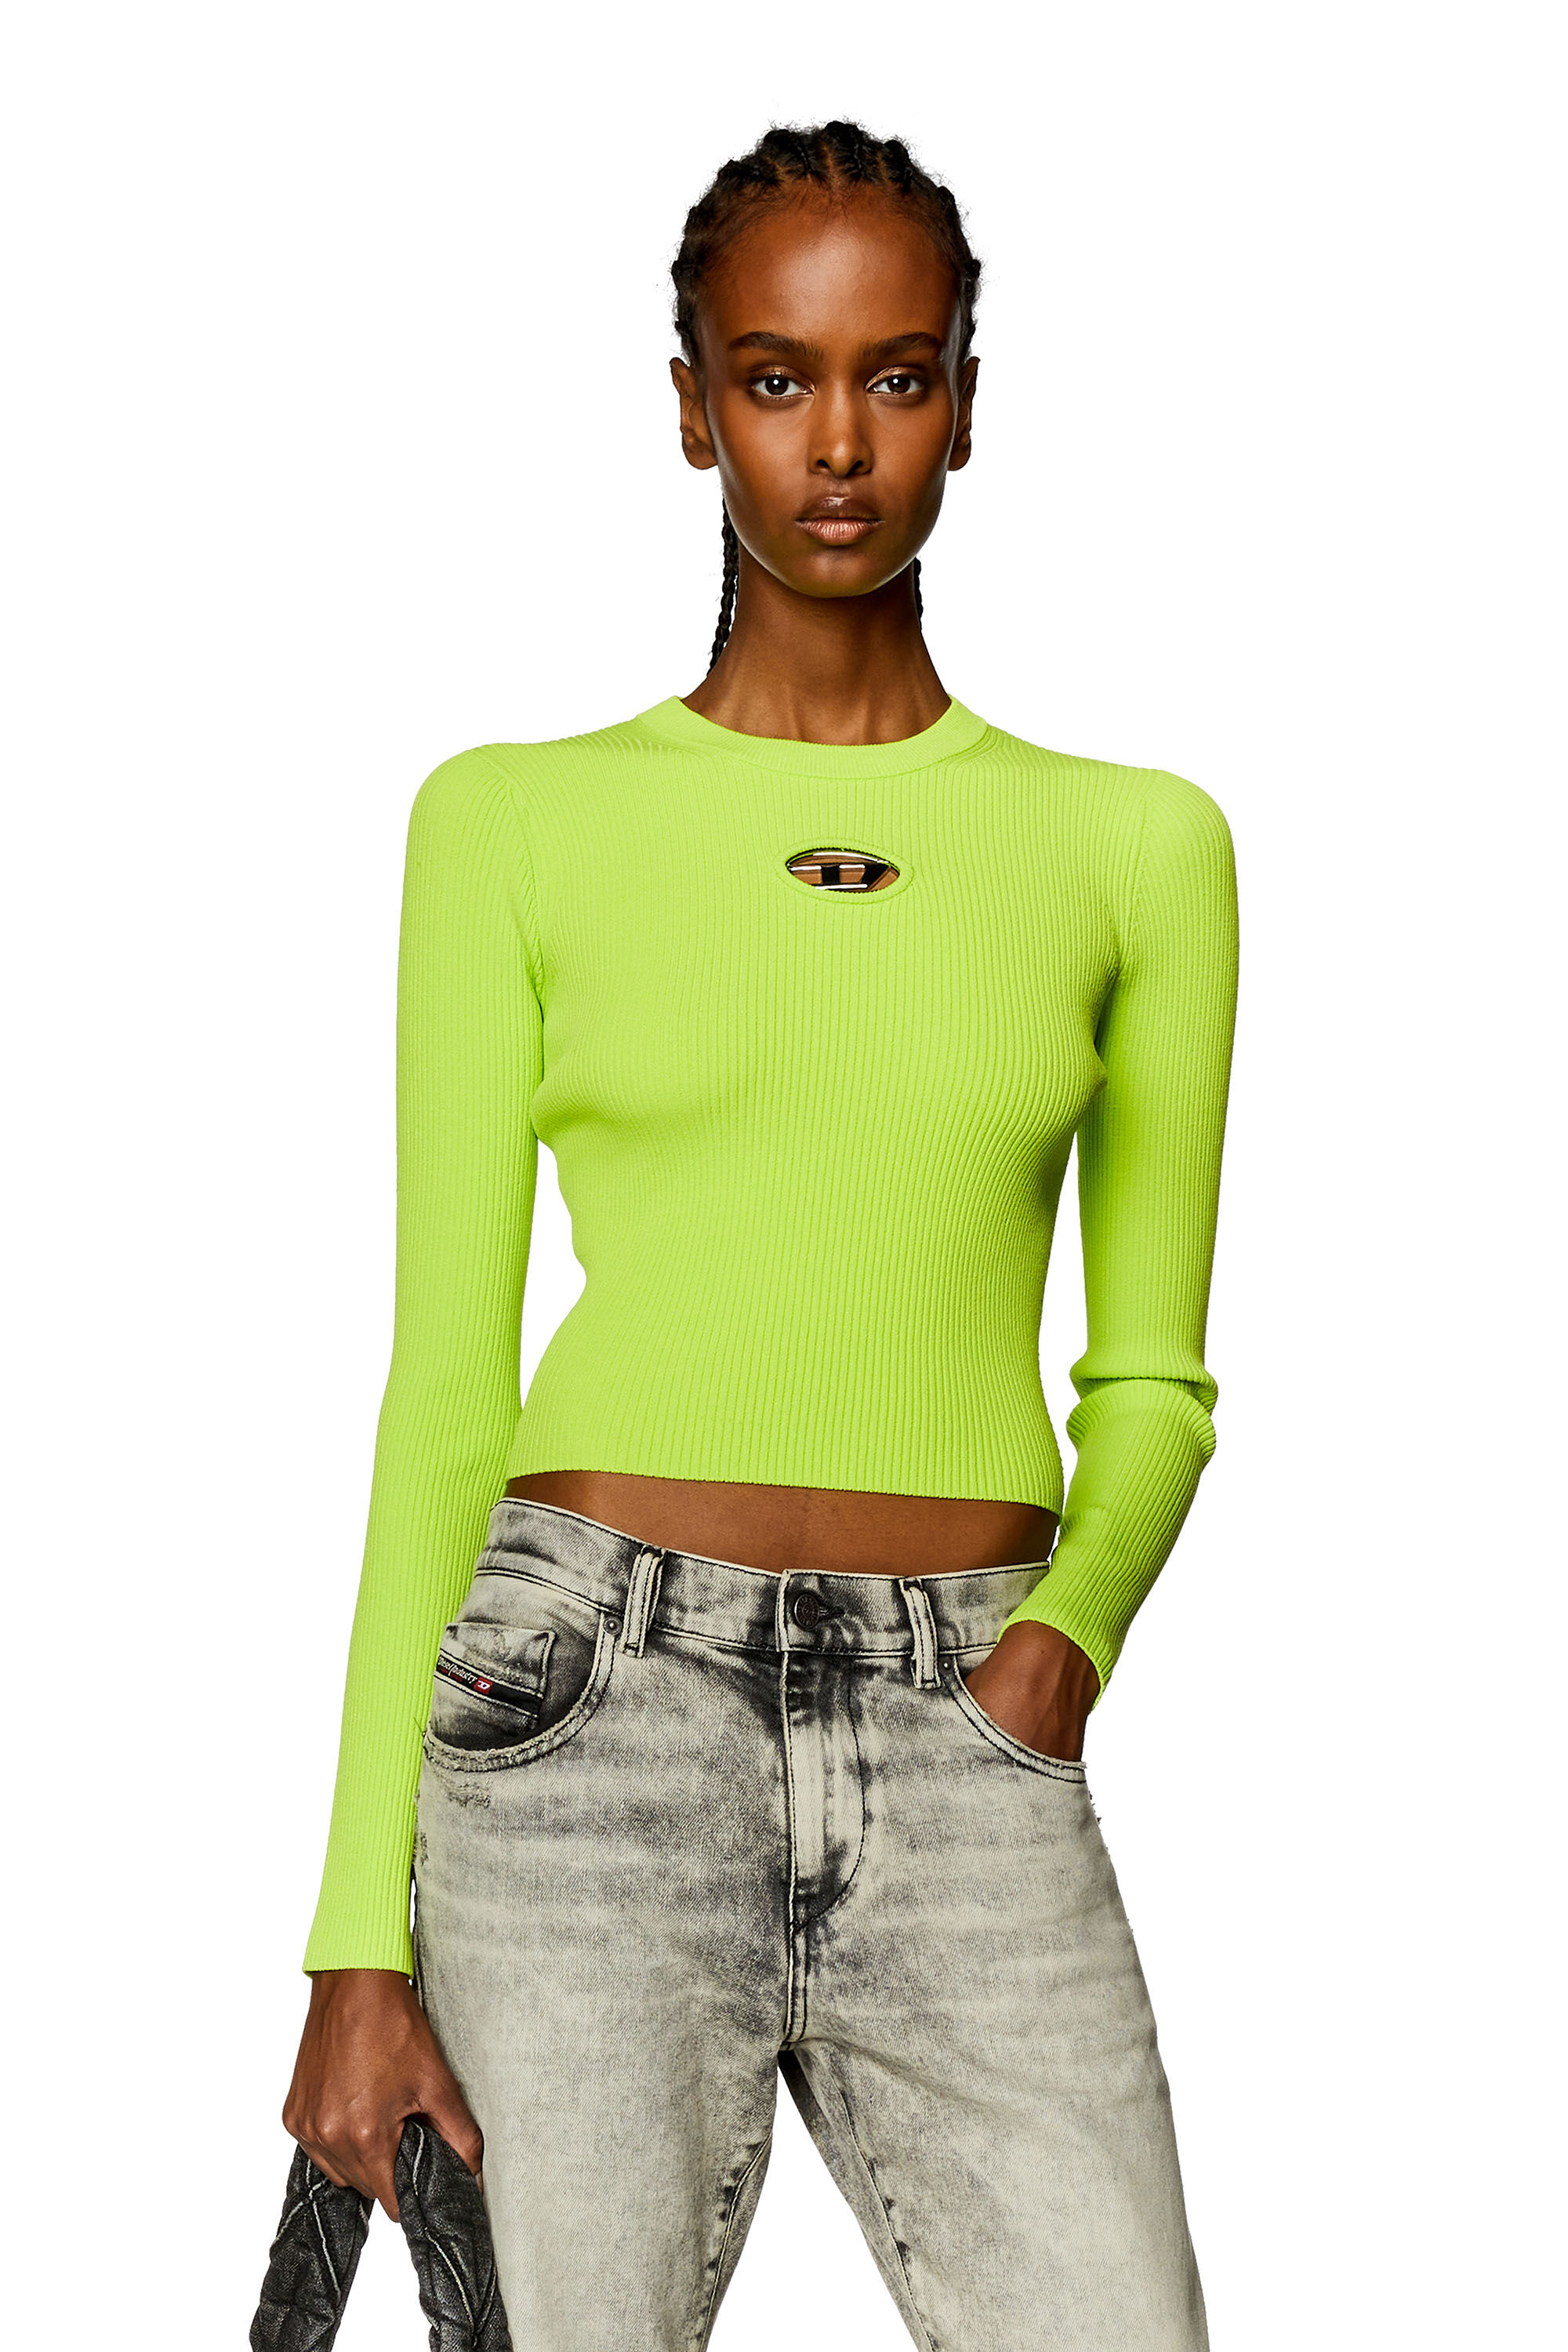 Diesel - M-VALARY, Woman Ribbed-knit long-sleeve top in Green - Image 3